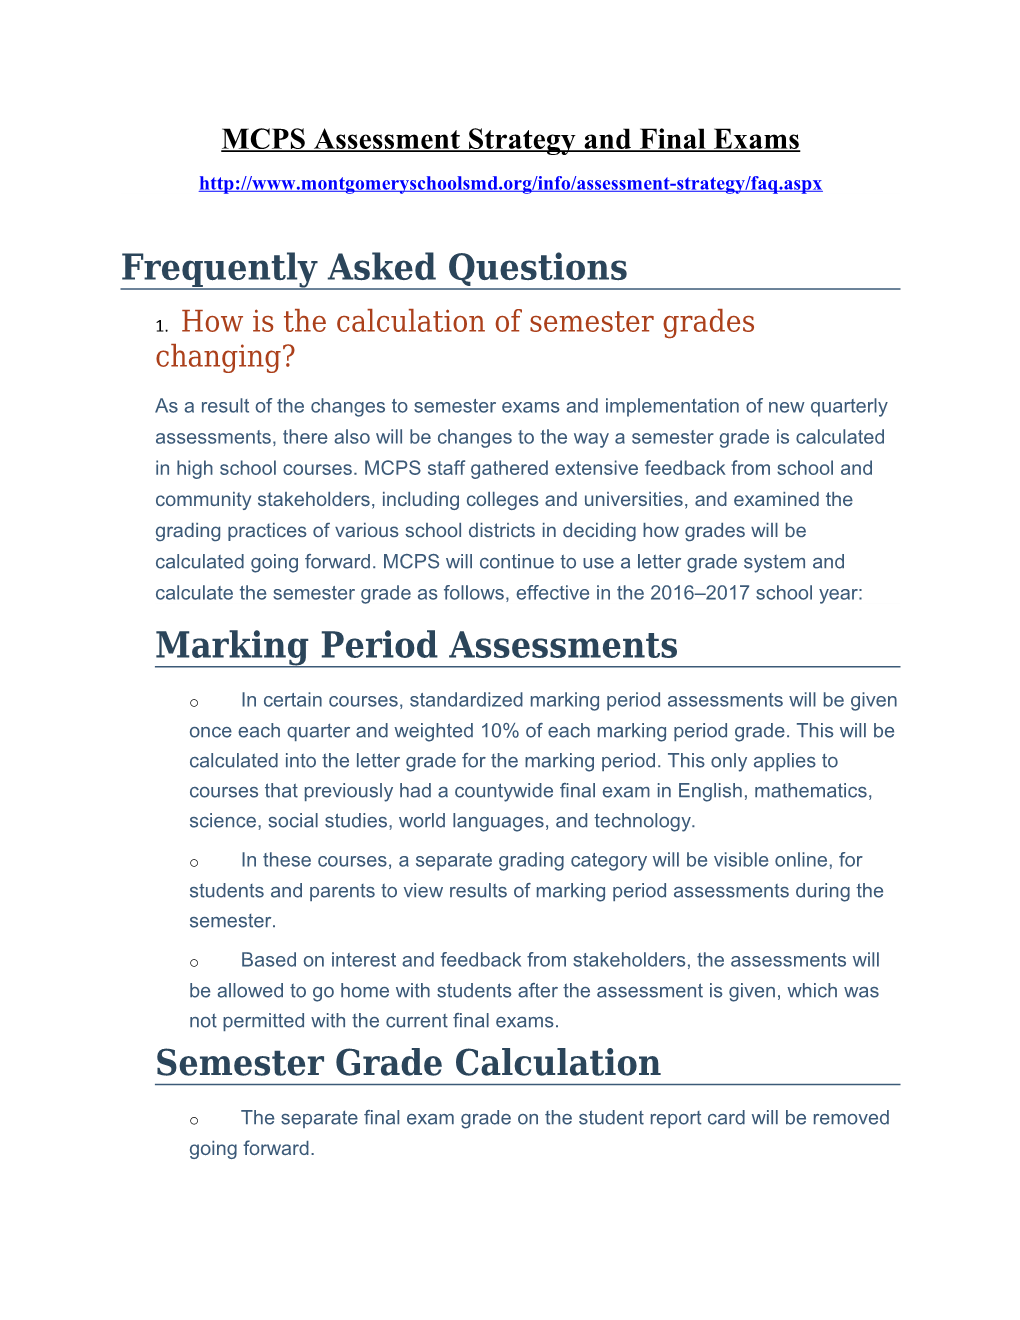 MCPS Assessment Strategy and Final Exams